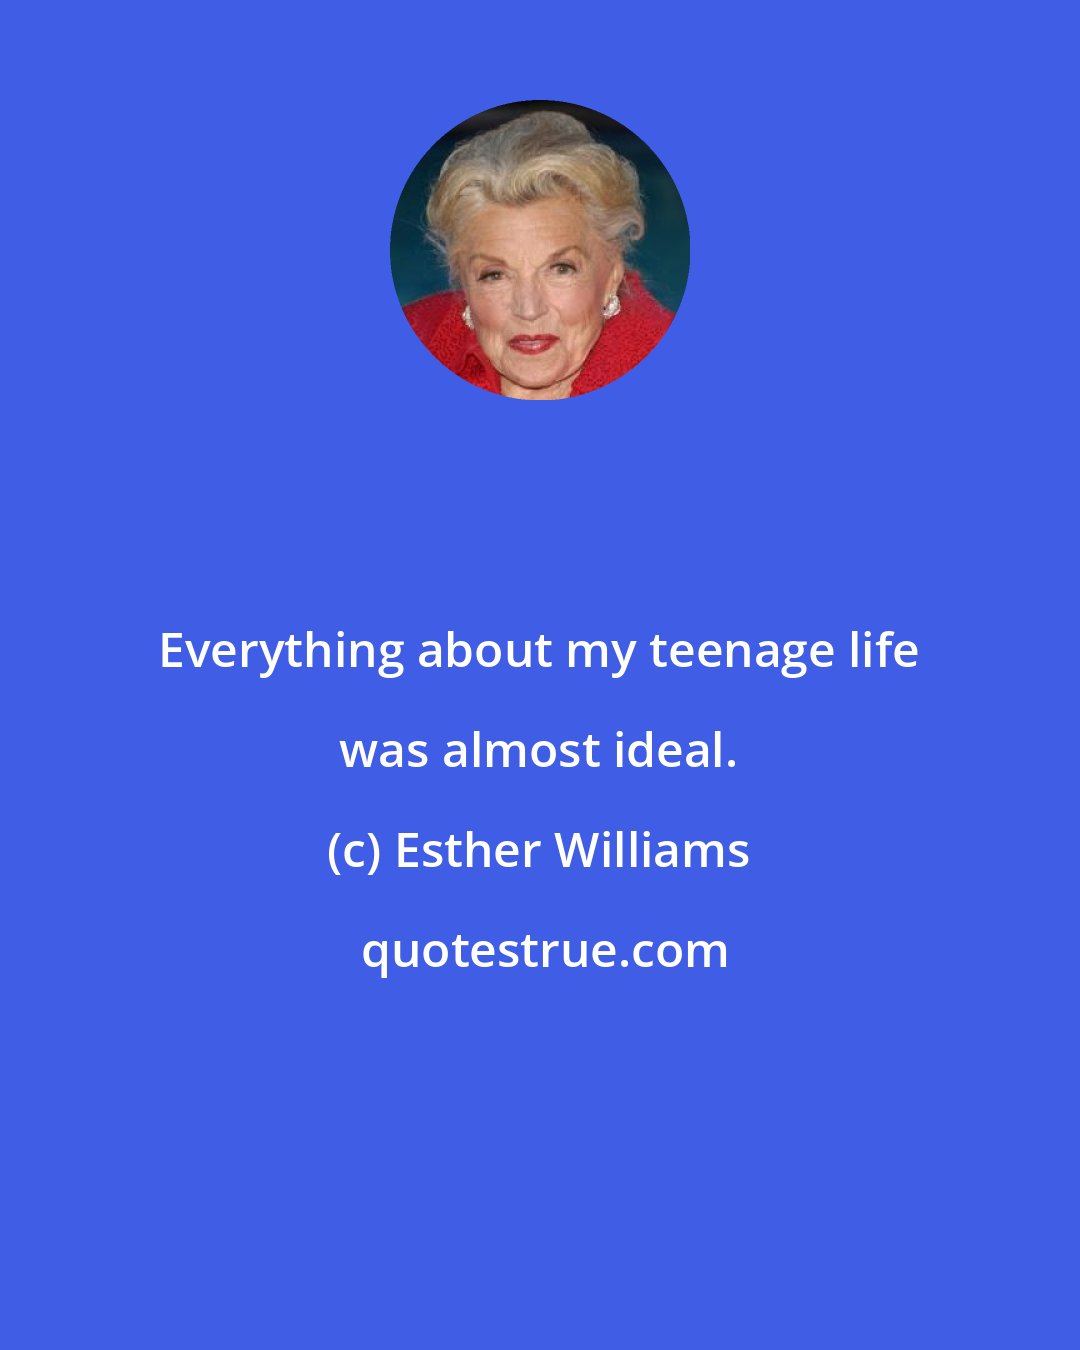 Esther Williams: Everything about my teenage life was almost ideal.